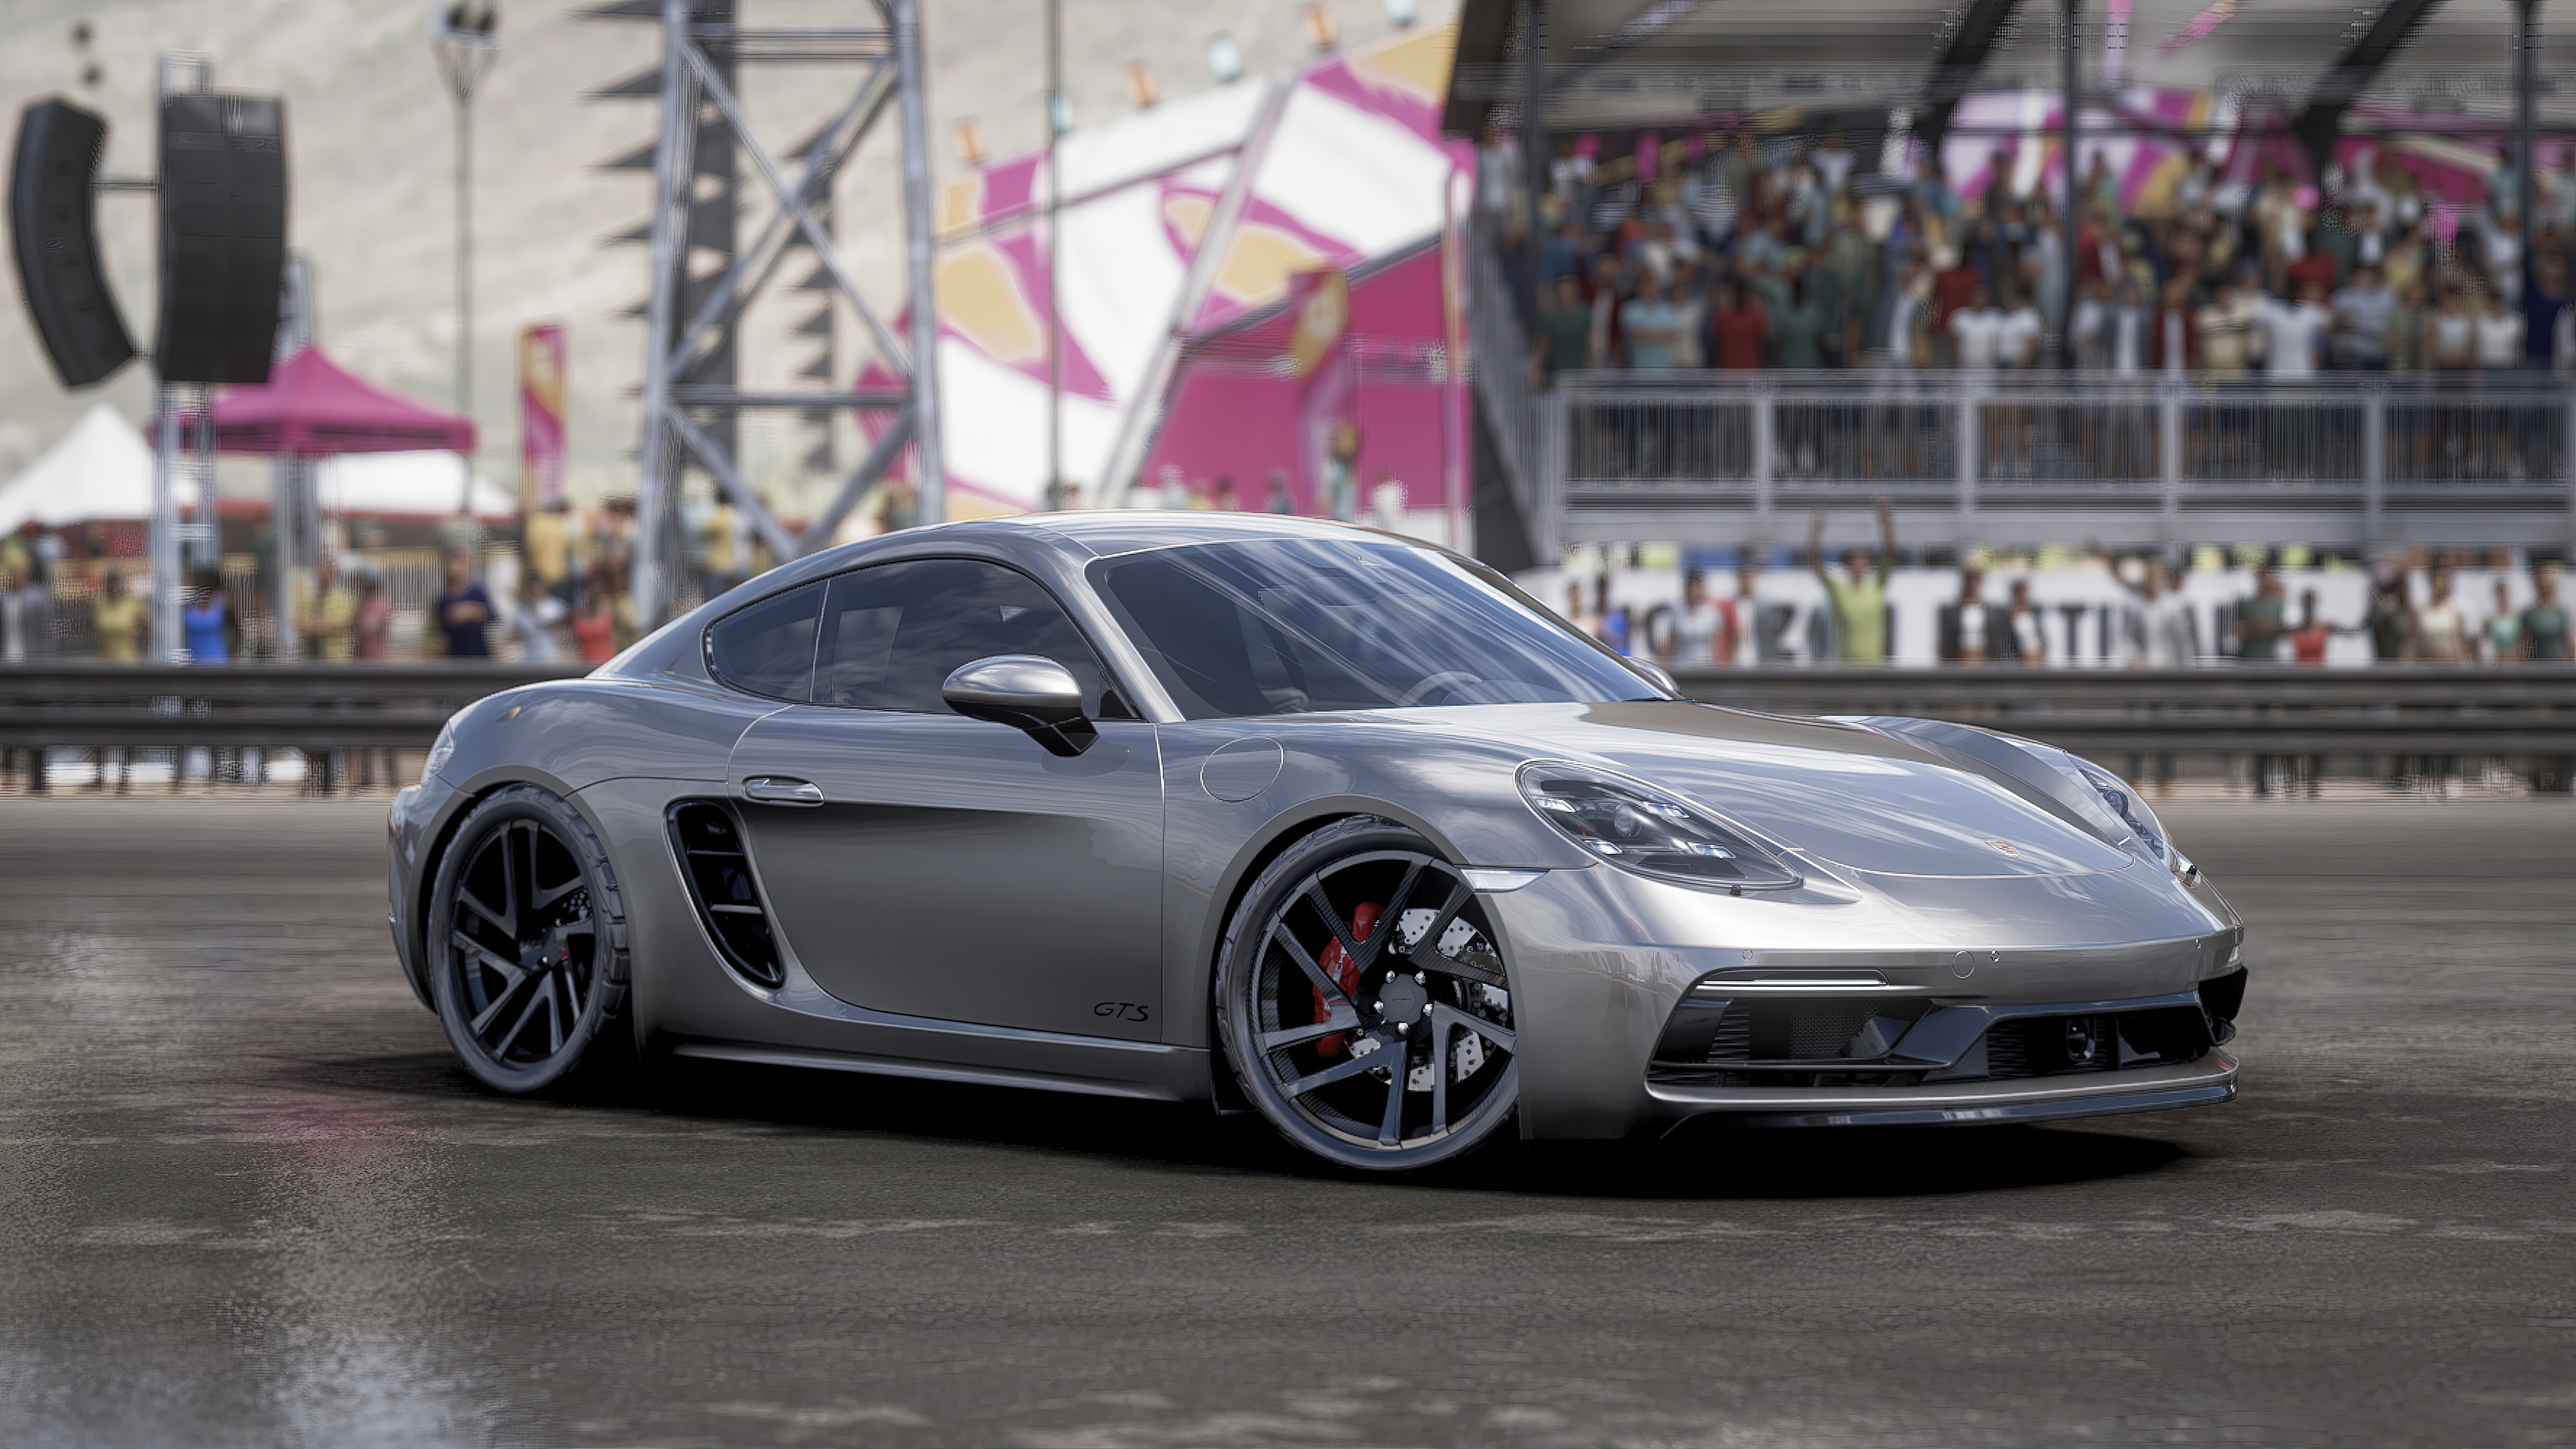 Forza Forza Horizon 5 Forza Horizon Porsche Porsche 911 Car Video Games Front Angle View 7680x4320